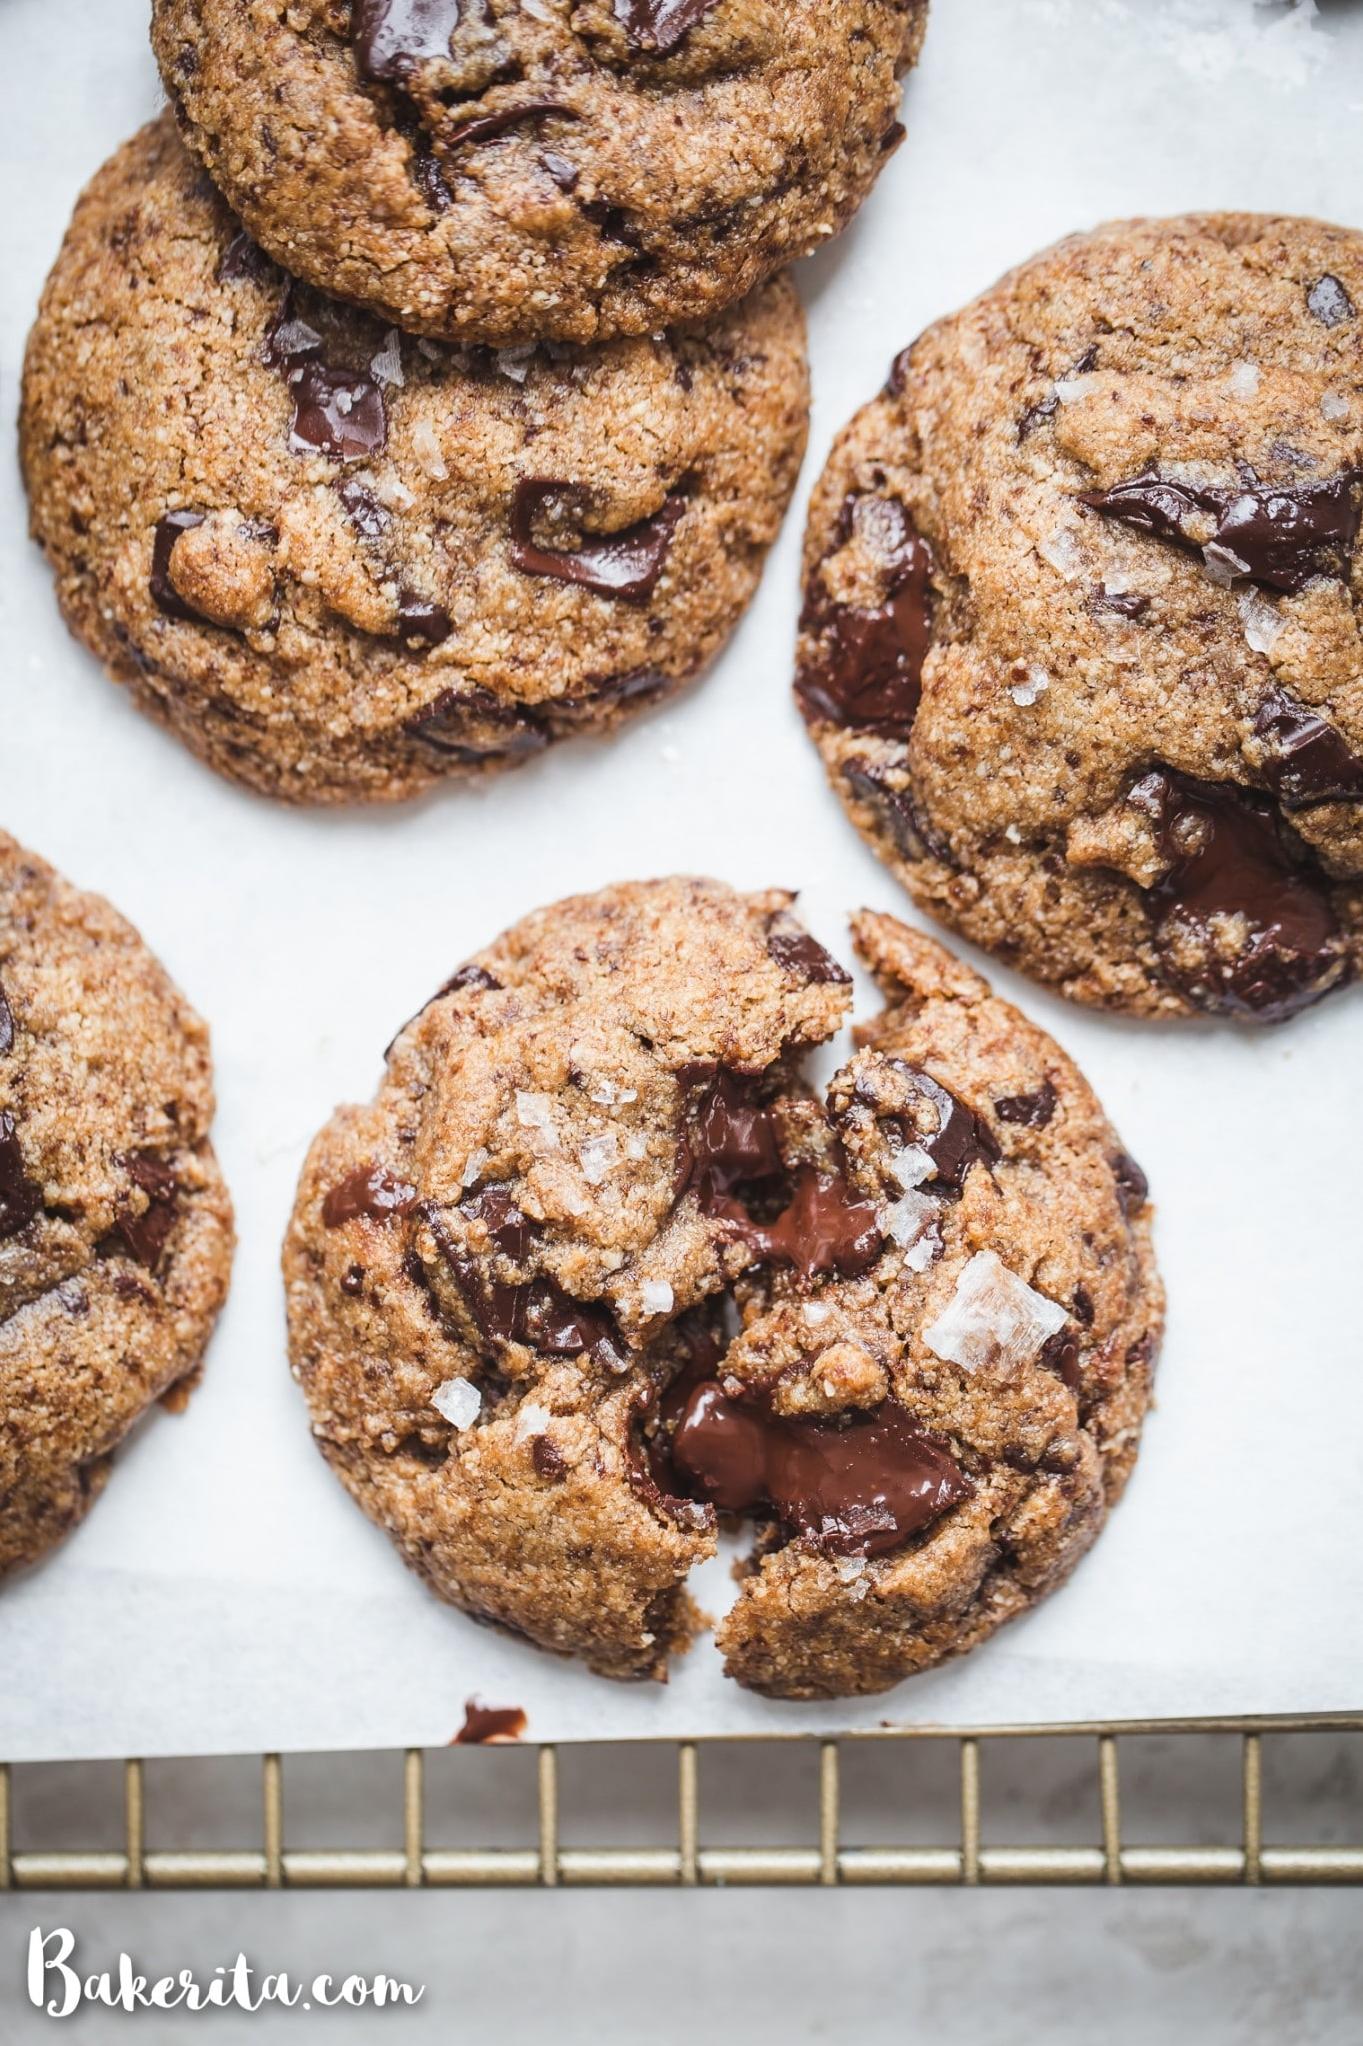  Enjoy these cookies with a glass of almond milk for the ultimate dairy-free dessert experience.